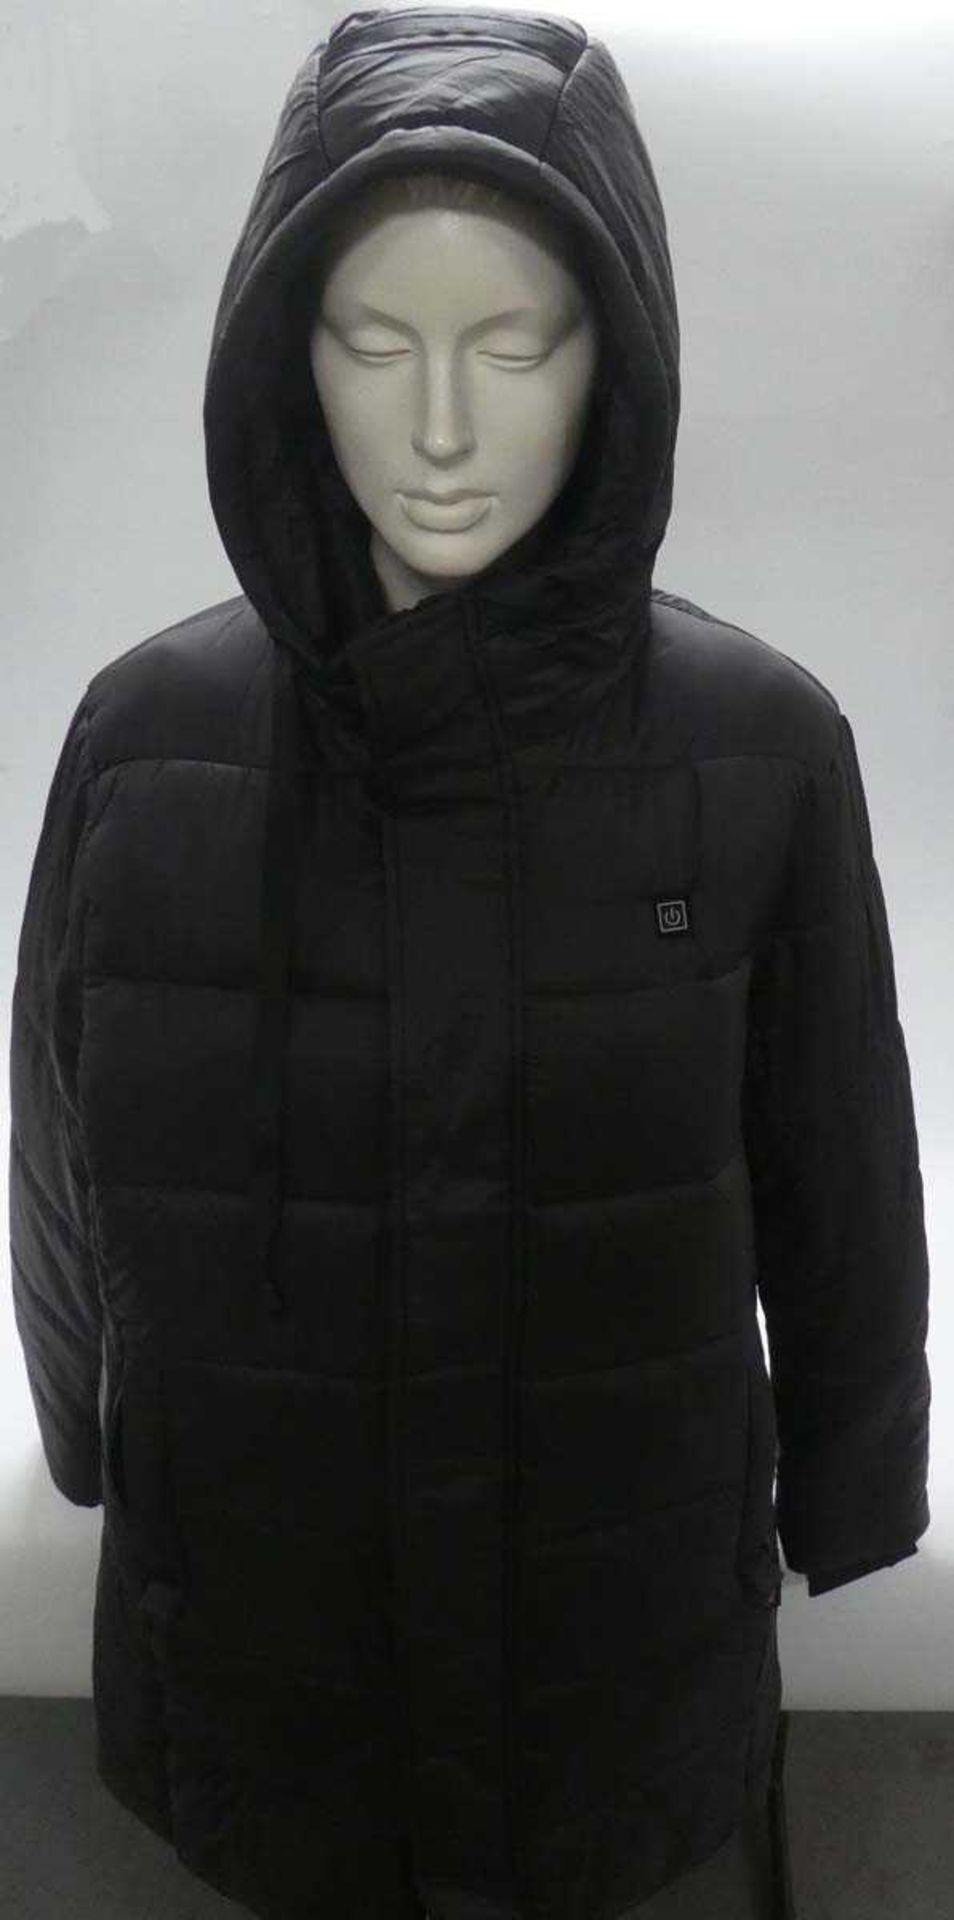 +VAT Thermofusion heated parka with 5000mAh battery pack size XXL